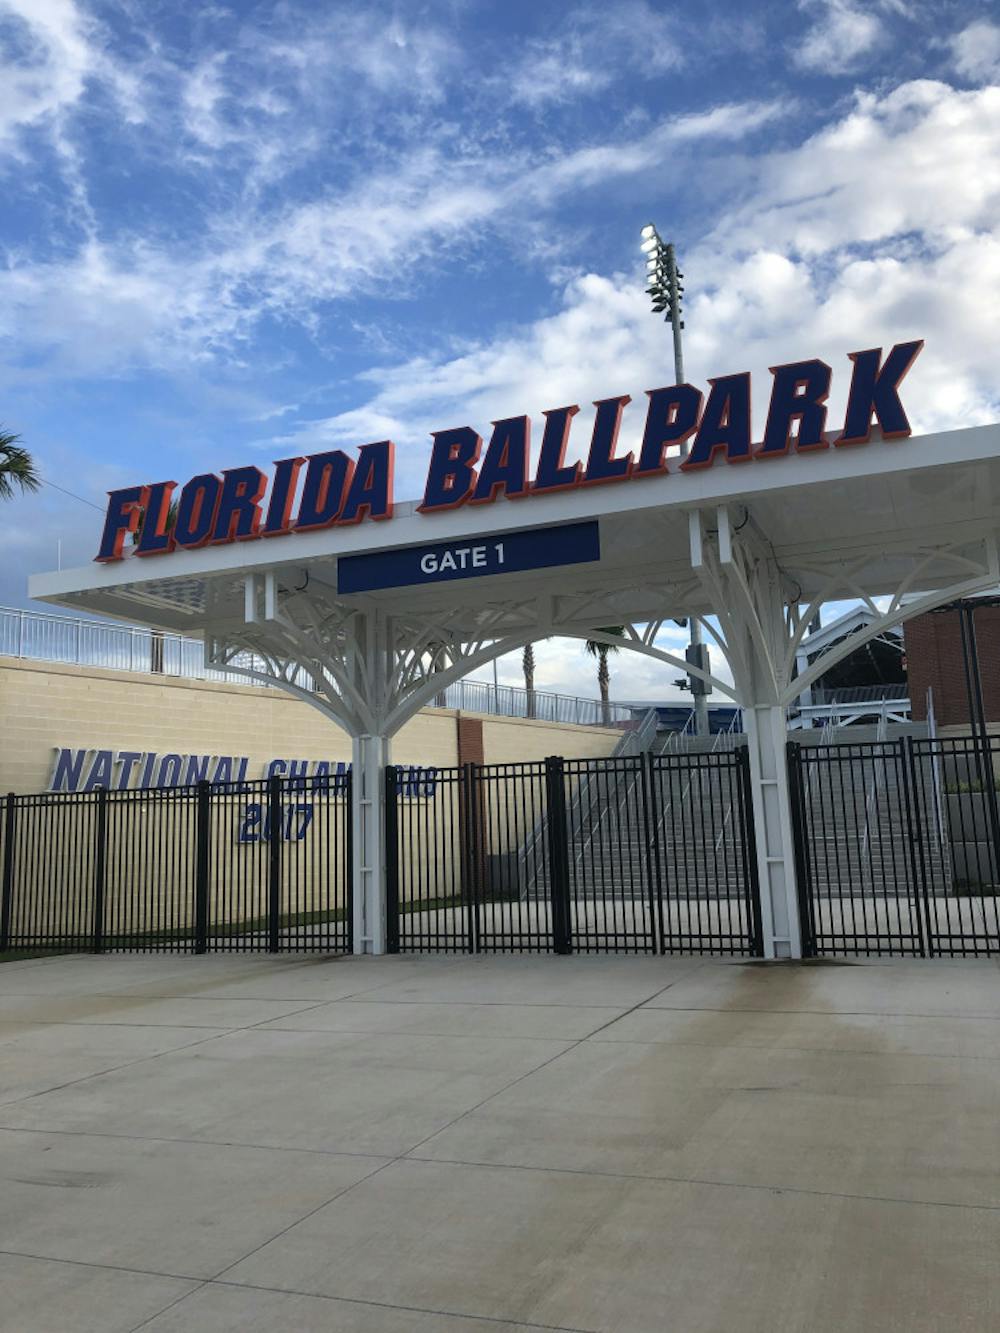 <p>Gate 1 of Florida Ballpark. <span id="docs-internal-guid-d87eaa6d-7fff-b7a6-1b82-8844035cfea0"><span>The new stadium, located next to Donald R. Dizney Stadium along Hull Road, has a capacity of over 7,000. </span></span></p>